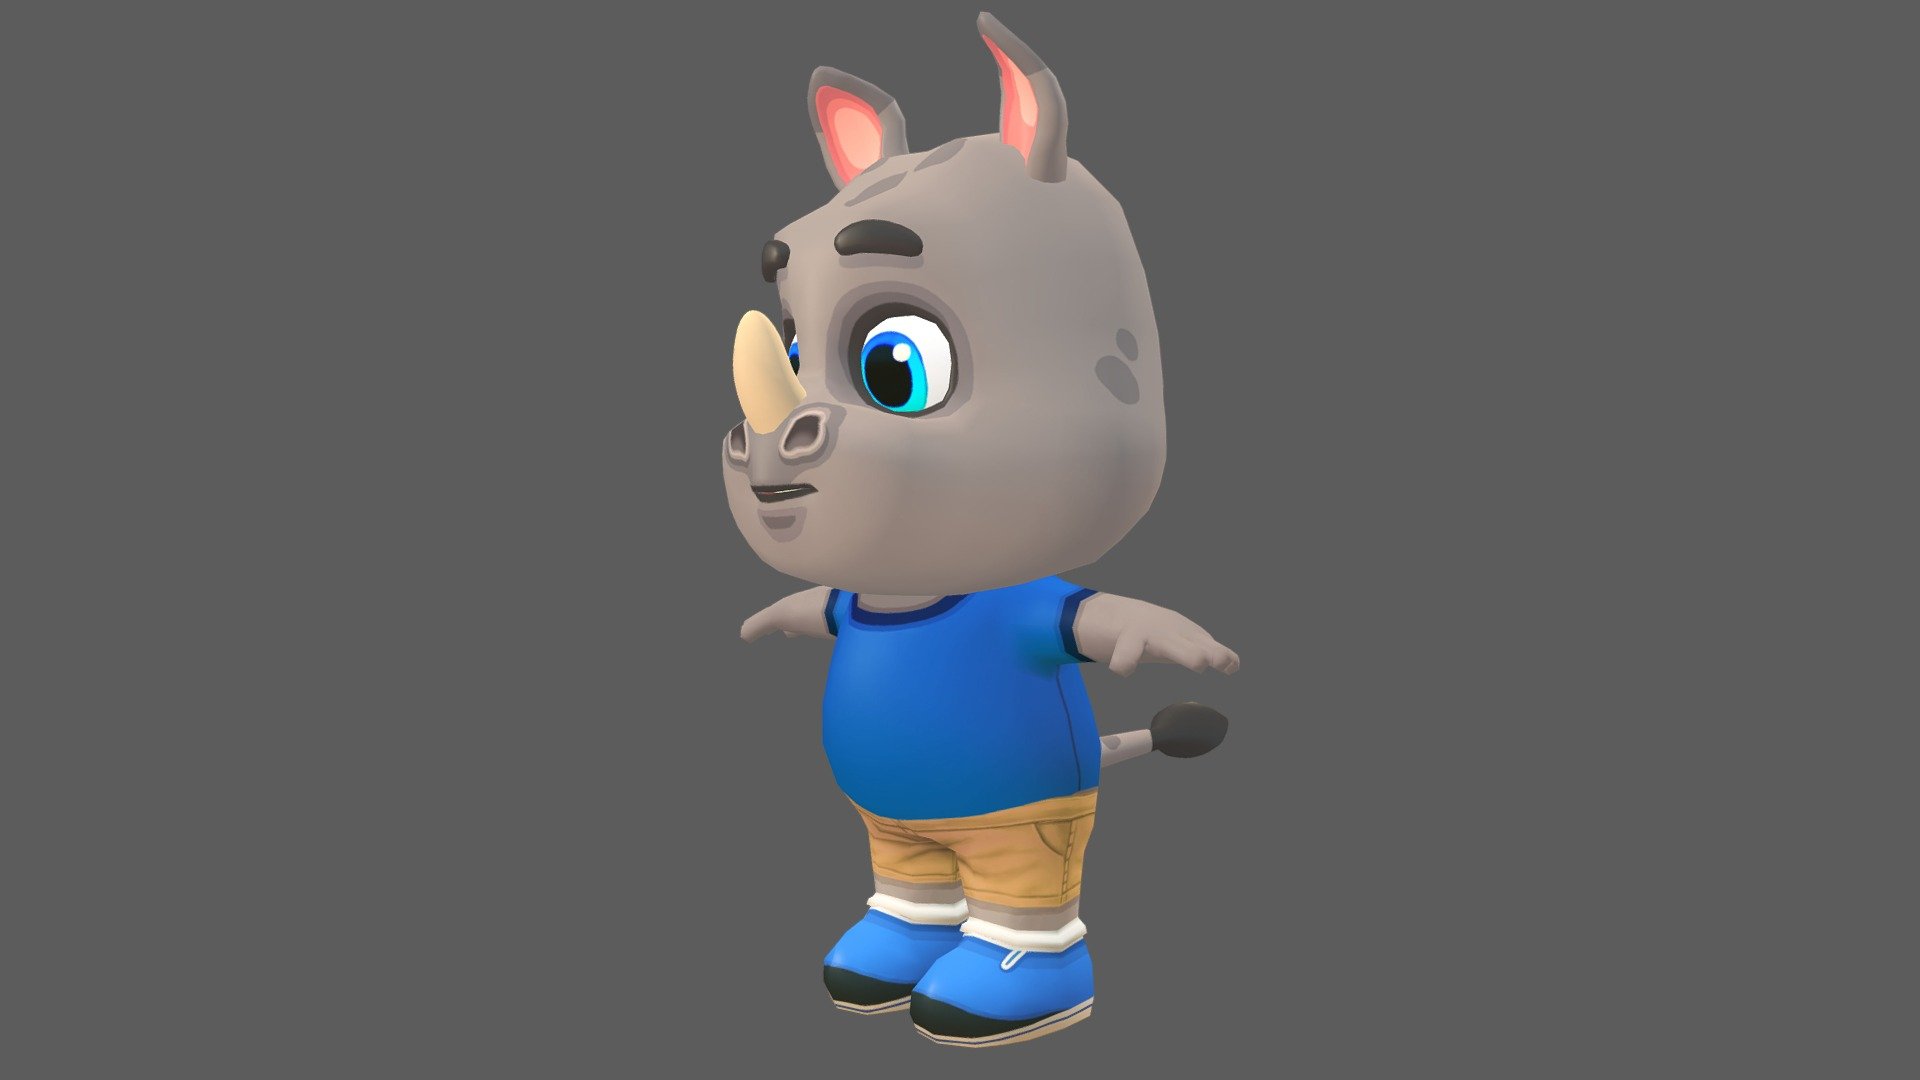 Rhino character for games and animations. The model is game ready and compatible with game engines.

Included Files:




Maya (Source files, Rig) for Unity and Unreal (.ma, .mb) - 2015 - 2020

FBX for Unity - 2014 - 2020

FBX for Unreal - 2014 - 2020

OBJ

Unity Project - Preconfigured Humanoid Rig

Supports Humanoid Animation:




Preconfigured Humanoid Rig &amp; Animation Clips

Unity Humanoid compatible FBX

Mixamo

Low poly model with four texture resolutions 4096x4096, 2048x2048, 1024x1024 &amp; 512x512.

The package includes 20 Animations:




Walk

Run

Idle

Jump

Leap left

Leap right

Death

Skidding

Roll

Crash

Power up

Whirl

Whirl jump

Waving in air

Backwards run

Dizzy

Gum Bubble

Gliding

Waving

Looking behind

The model is fully rigged and can be easily animated or modified if required.

The model is game ready at:




3946 Polys

3938 Verts

UV mapped with non-overlapping UV's. The shadows and lights are baked in the texture 3d model